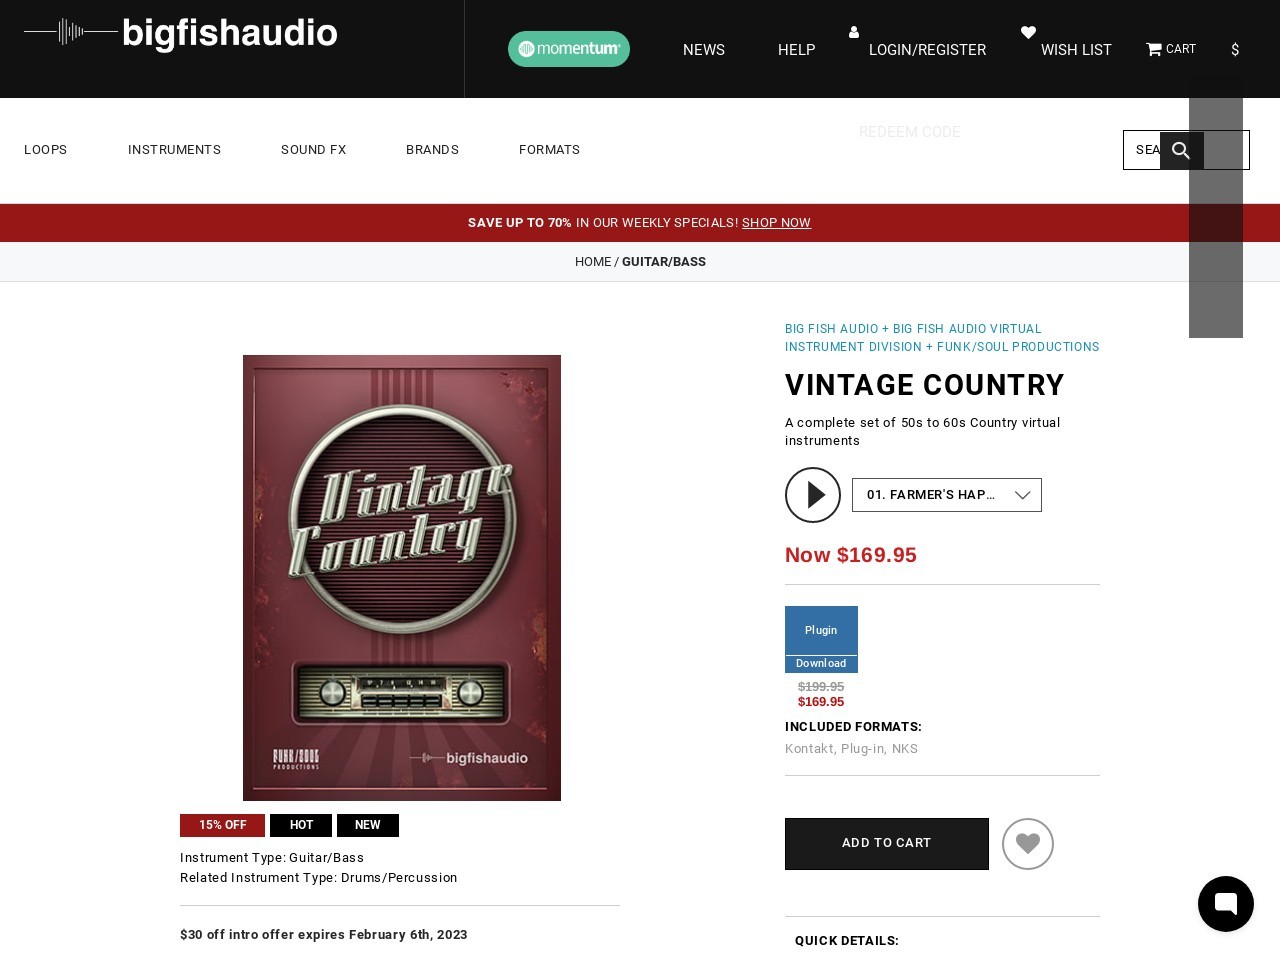 Big Fish Audio - Vintage Country - A complete set of 50s to 60s Country virtual instruments